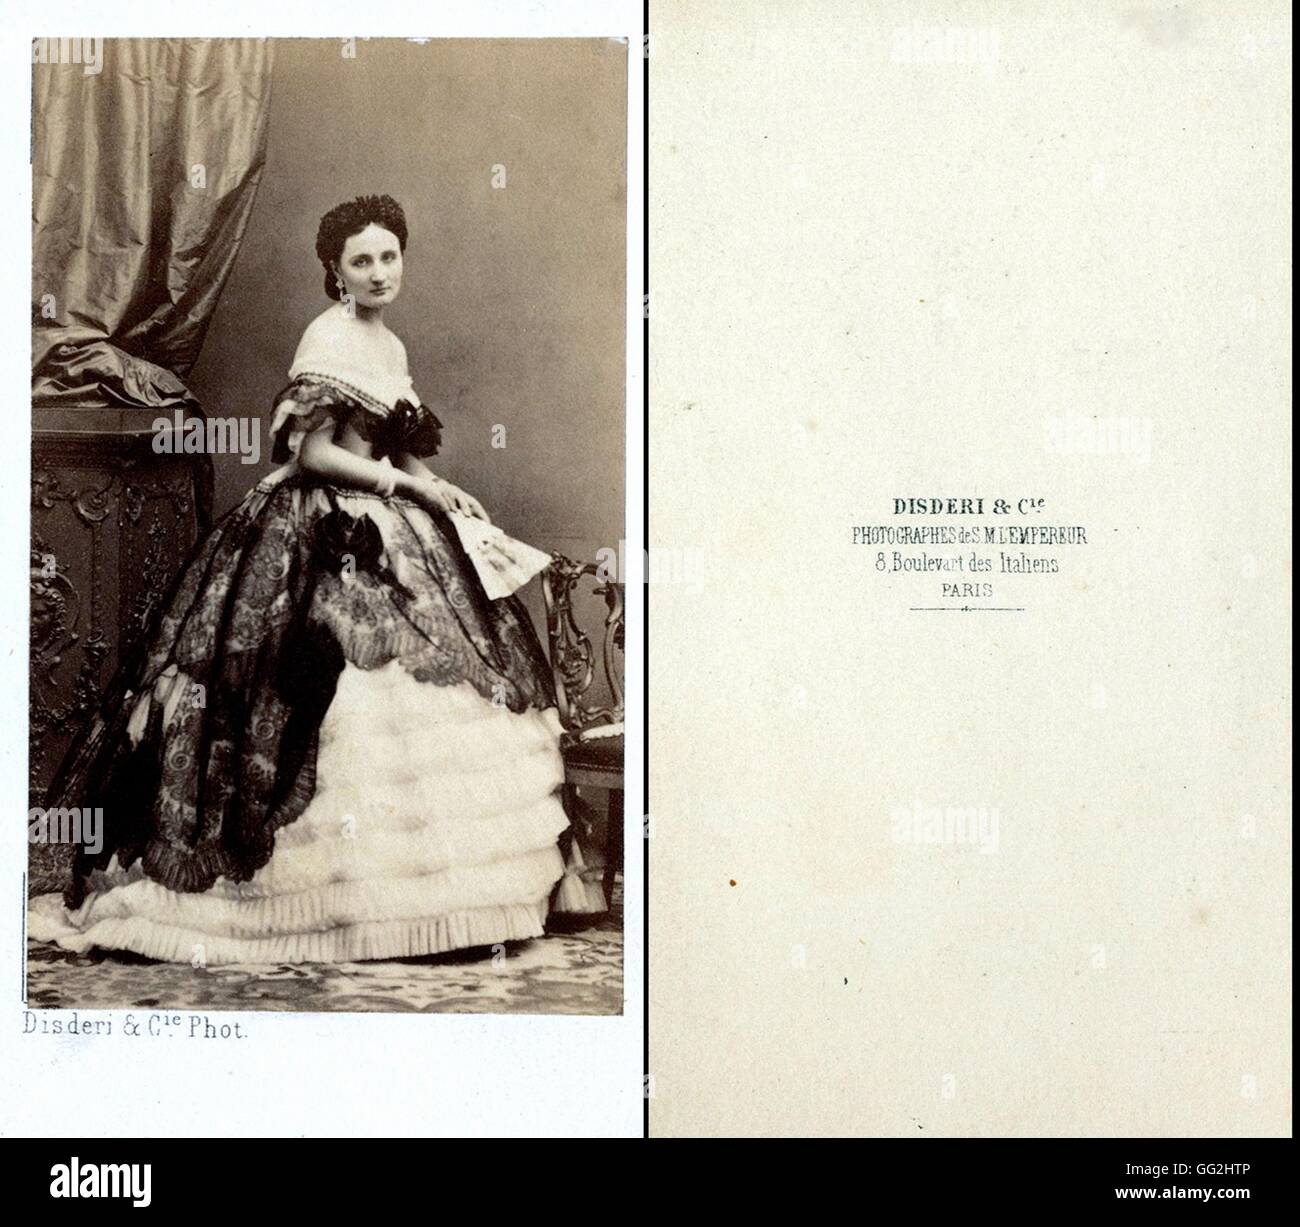 Eugenie de Montijo (1826-1920), 16th Countess of Teba, 15th Marchioness of  Ardales (1826-1920). Last